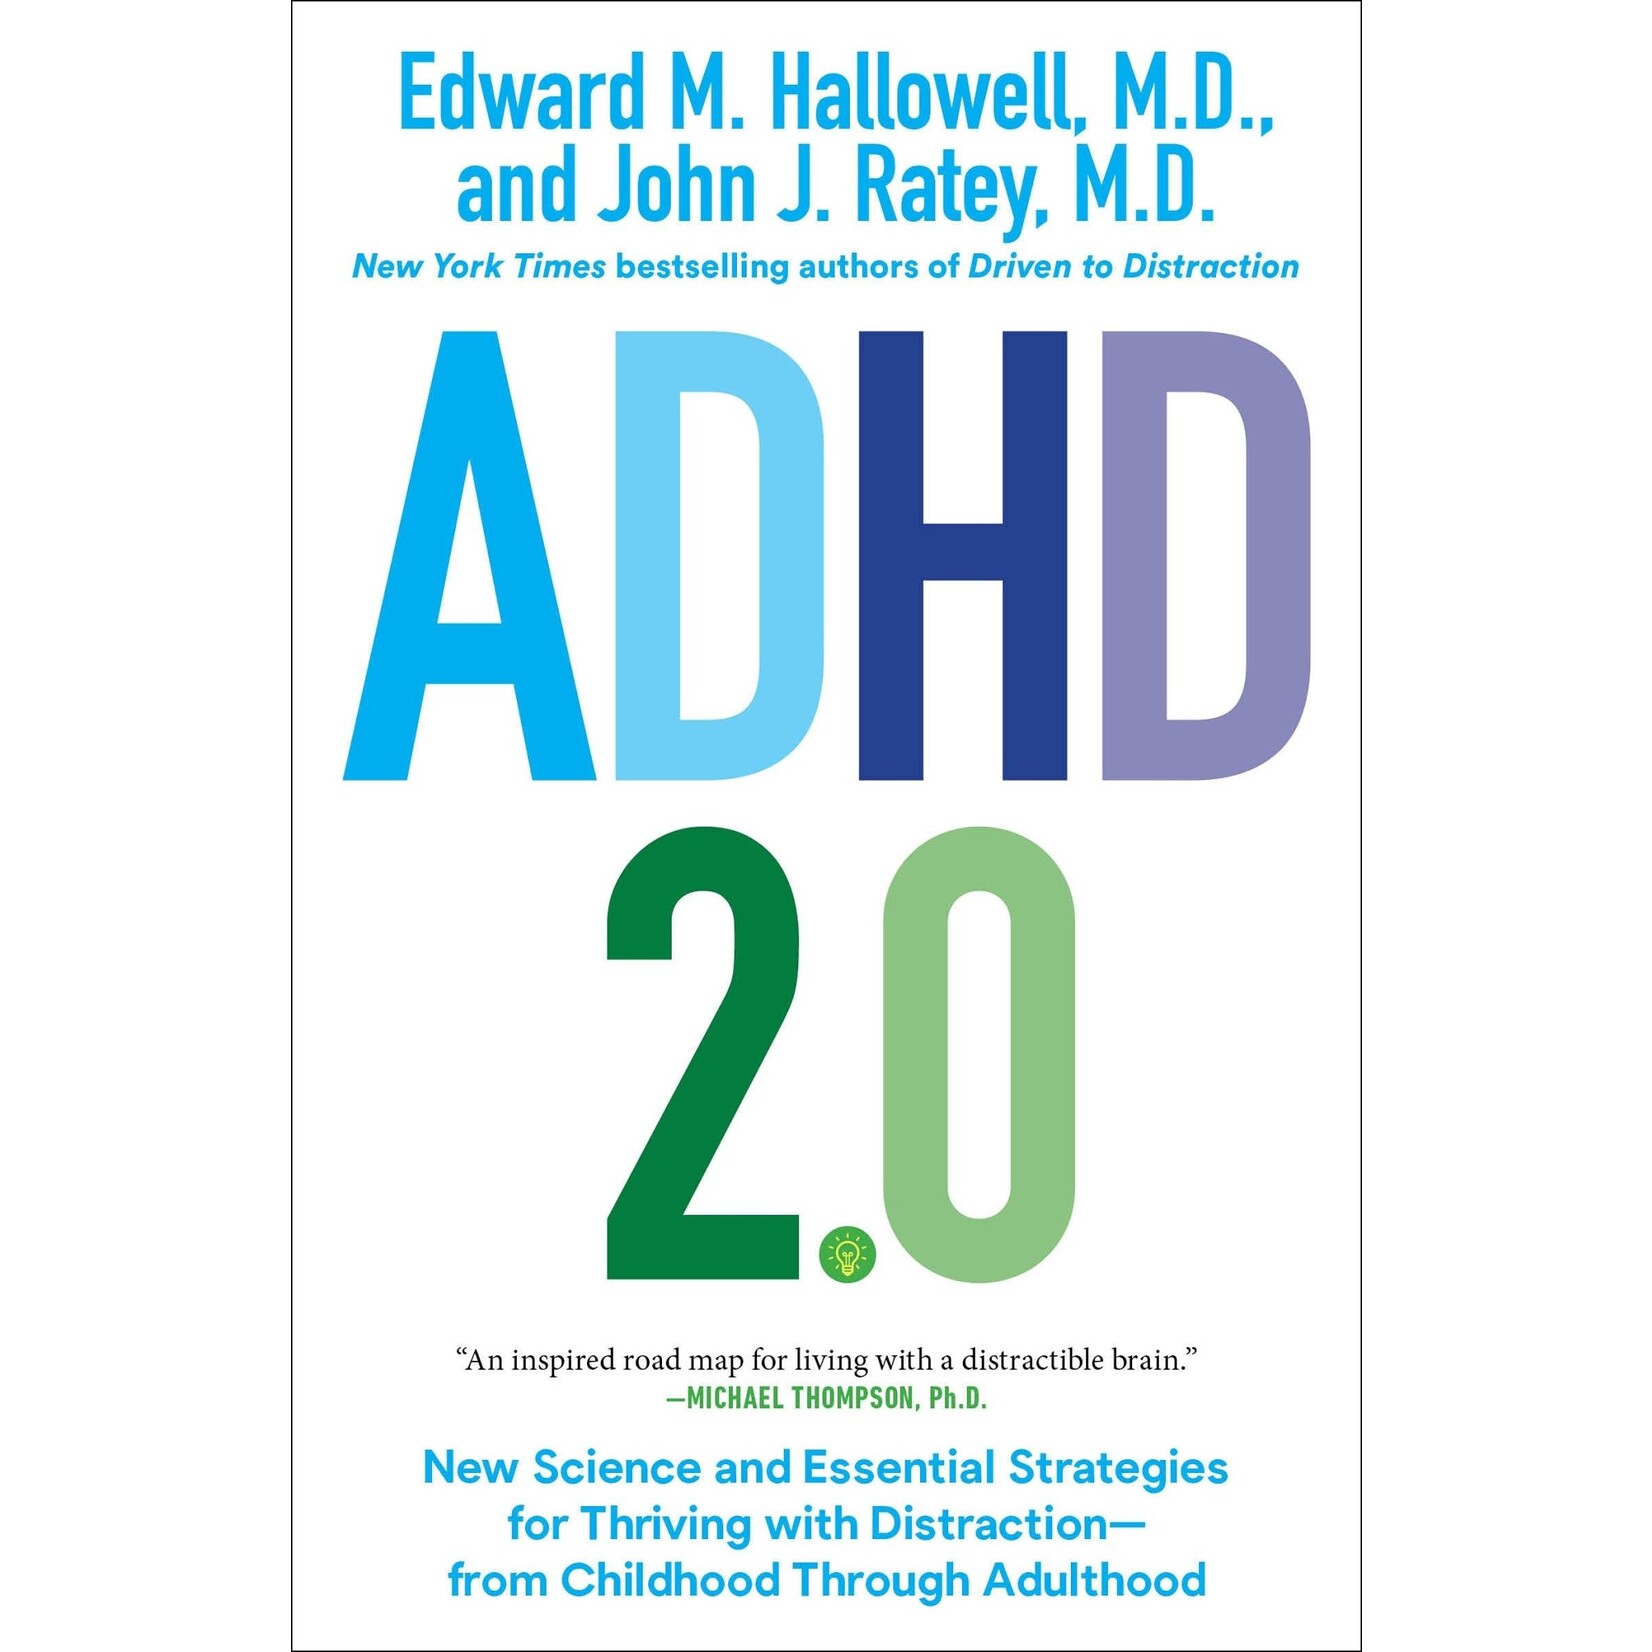 ADHD 2.0: New Science and Essential Strategies for Thriving with Distraction--from Childhood through Adulthood - SIGNED COPY